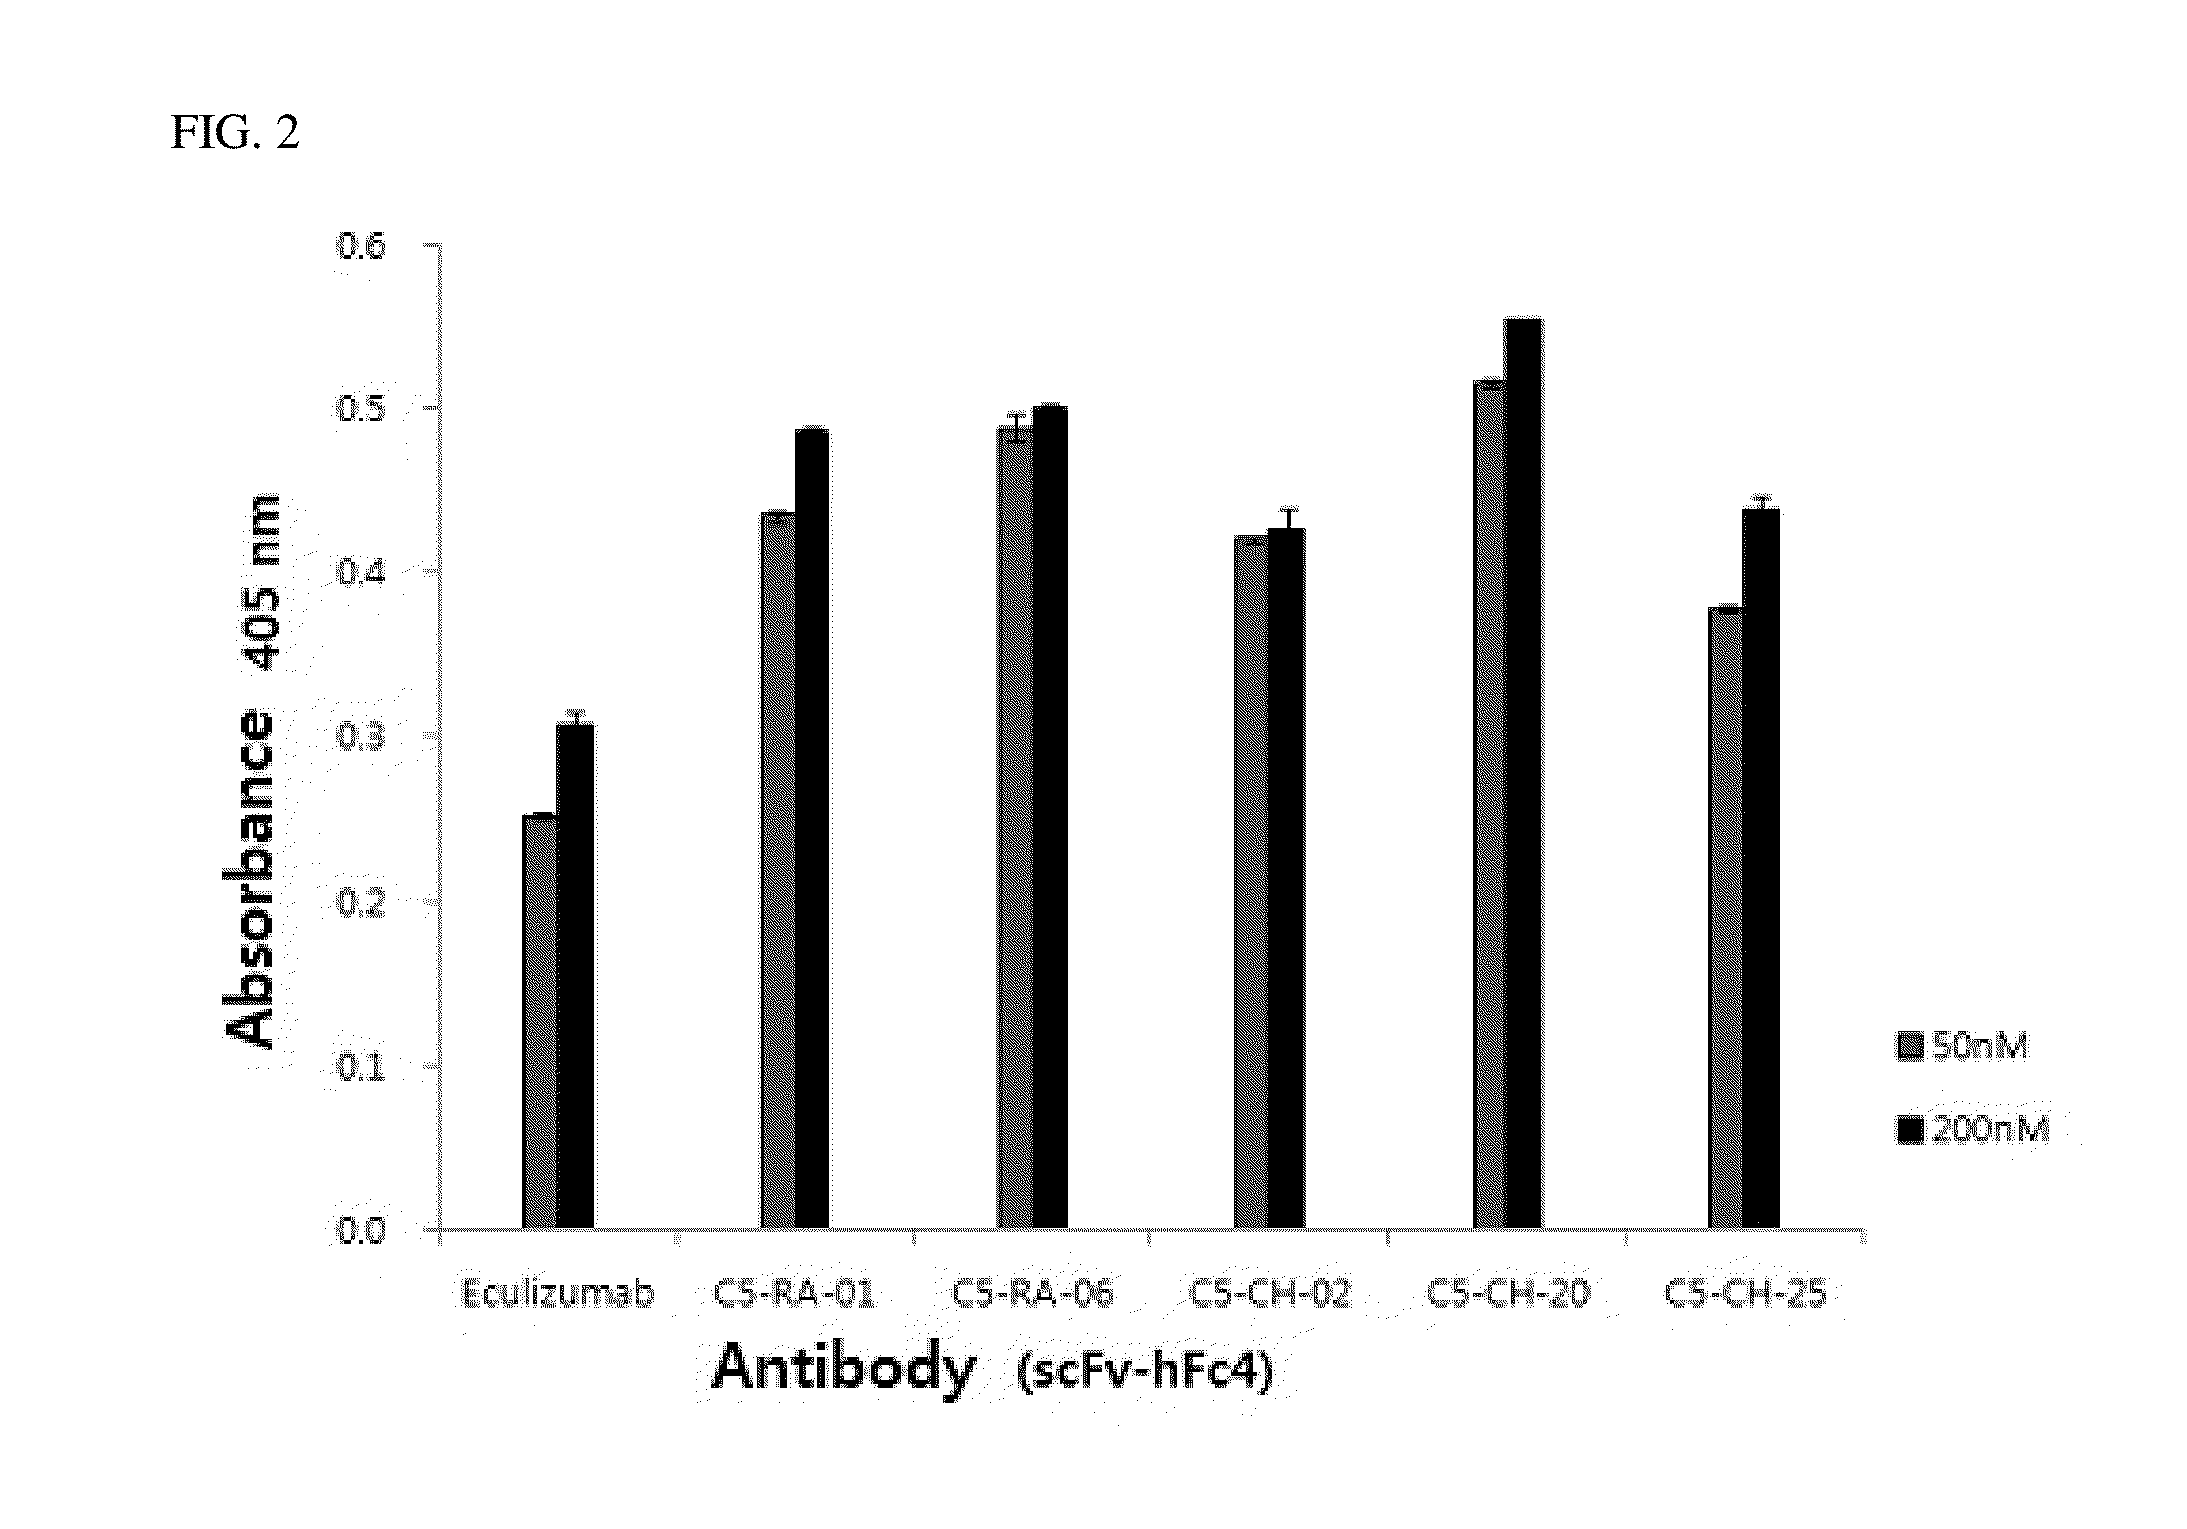 C5 antibody and method for preventing and treating complement-related diseases